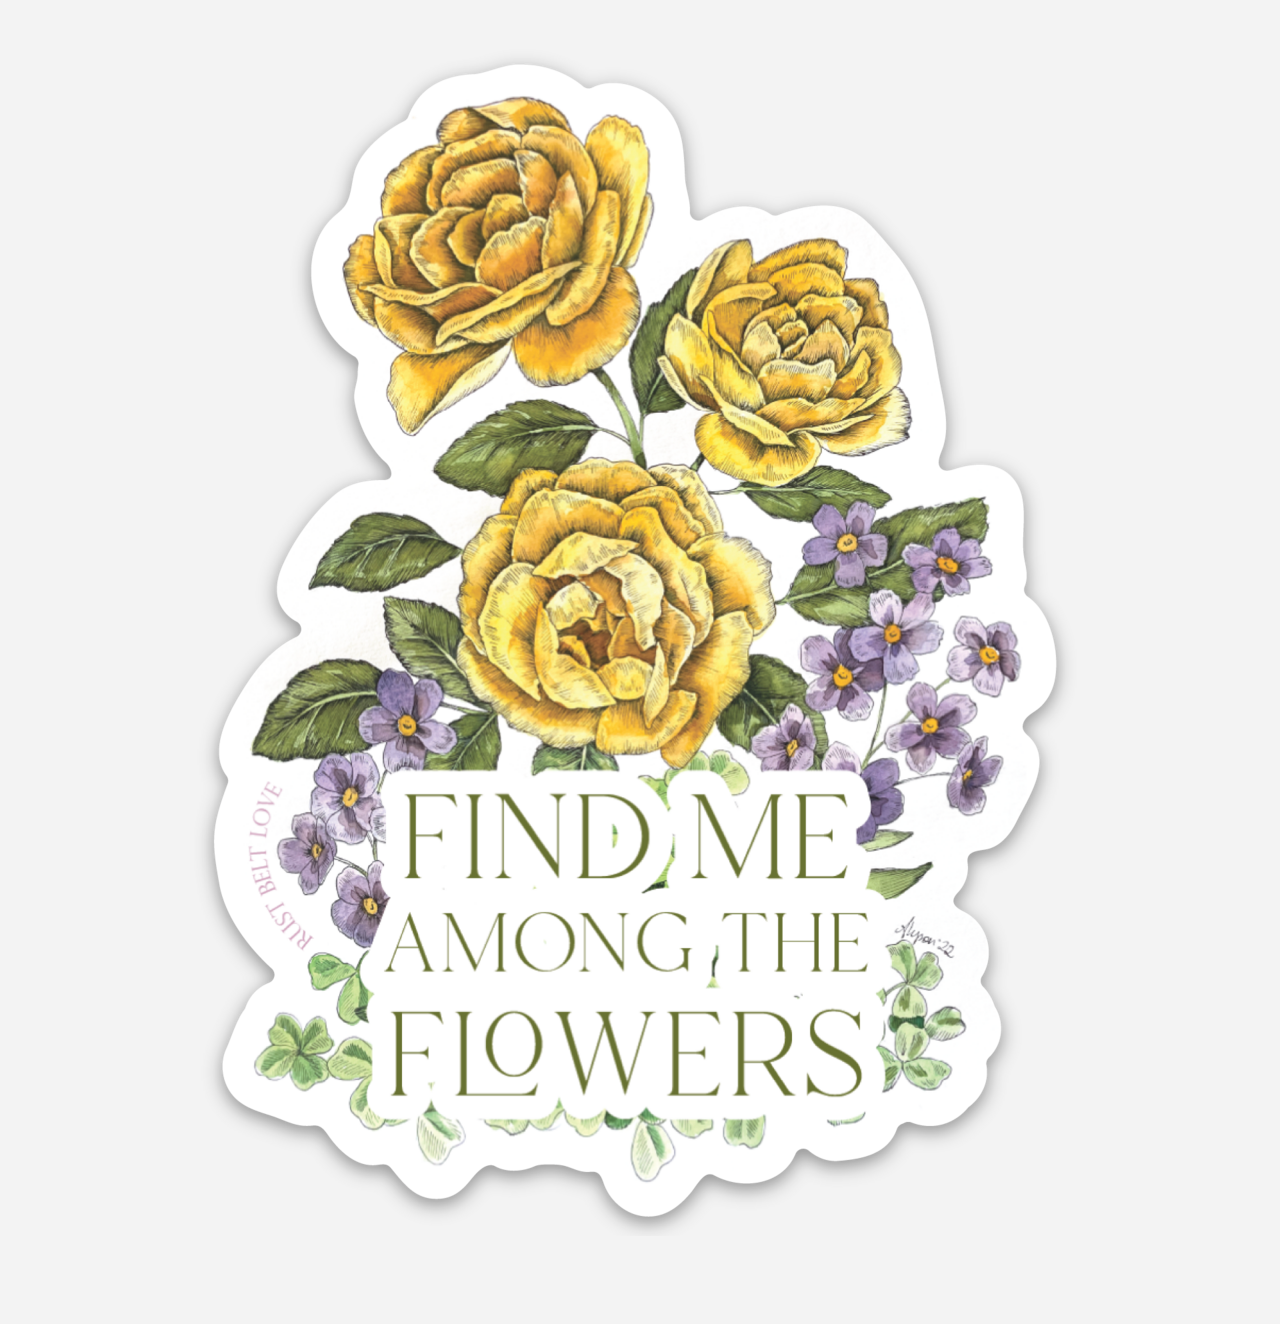 Multi-colored floral sticker that says "Find me among the flowers" by Rust Belt Love